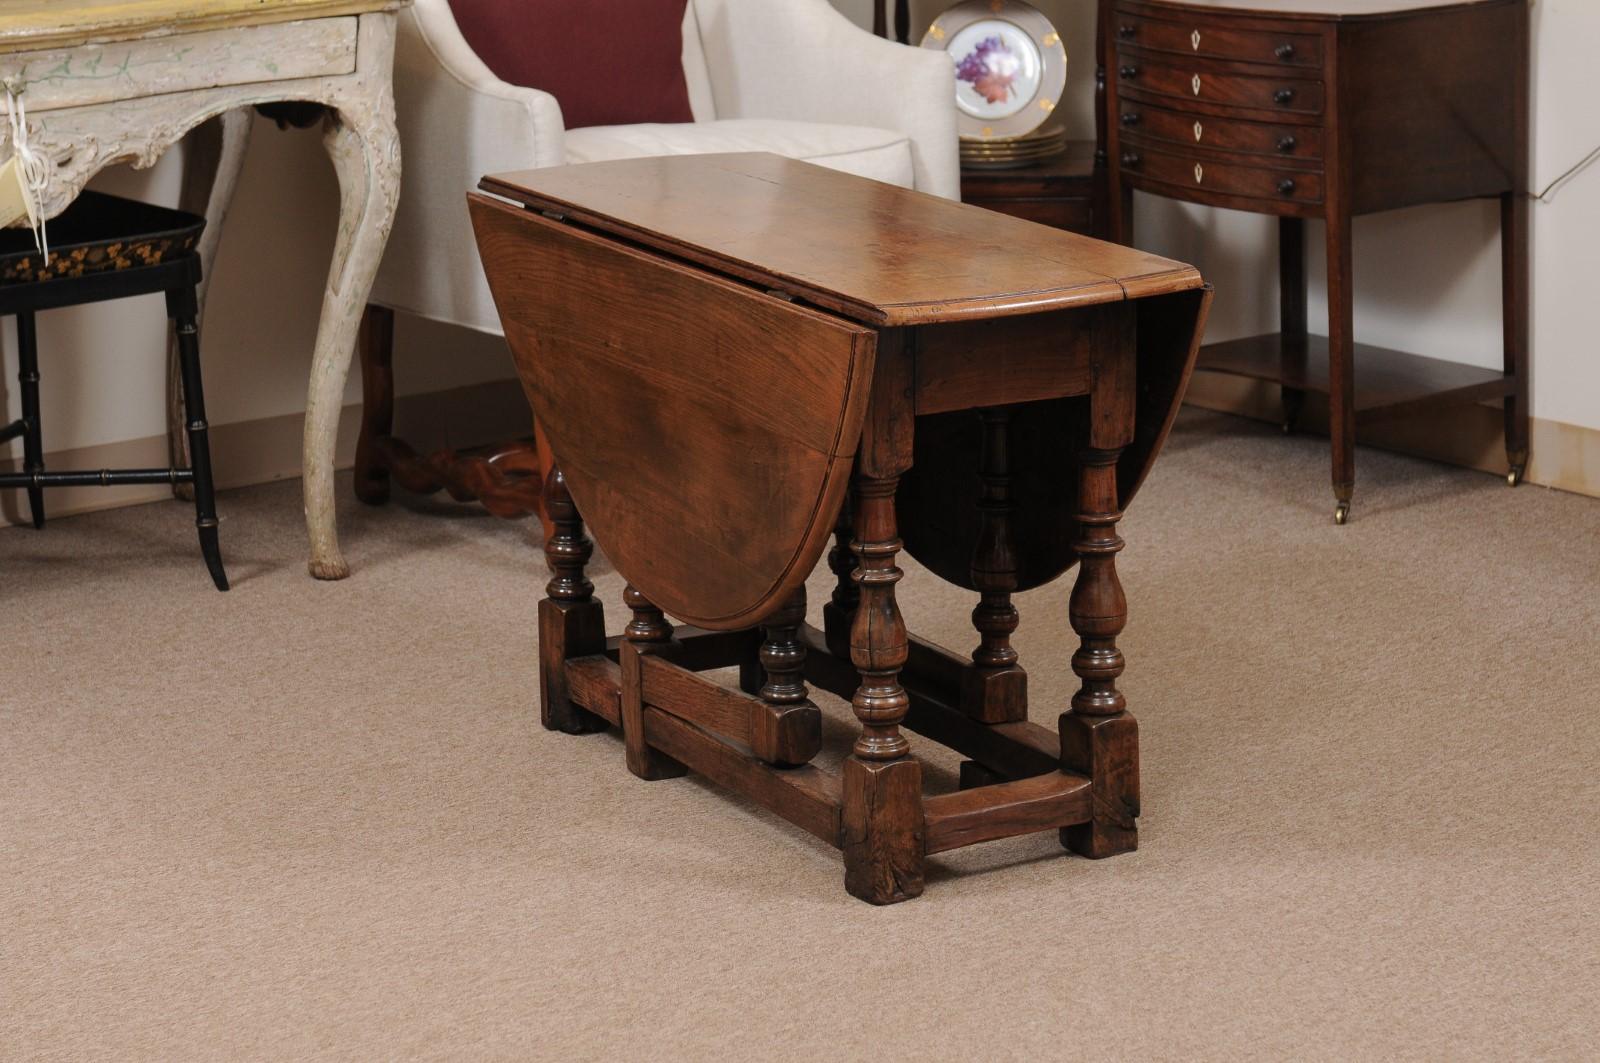 18th Century English Walnut Gate Leg Table with Drop Leaves & Turned Legs For Sale 6